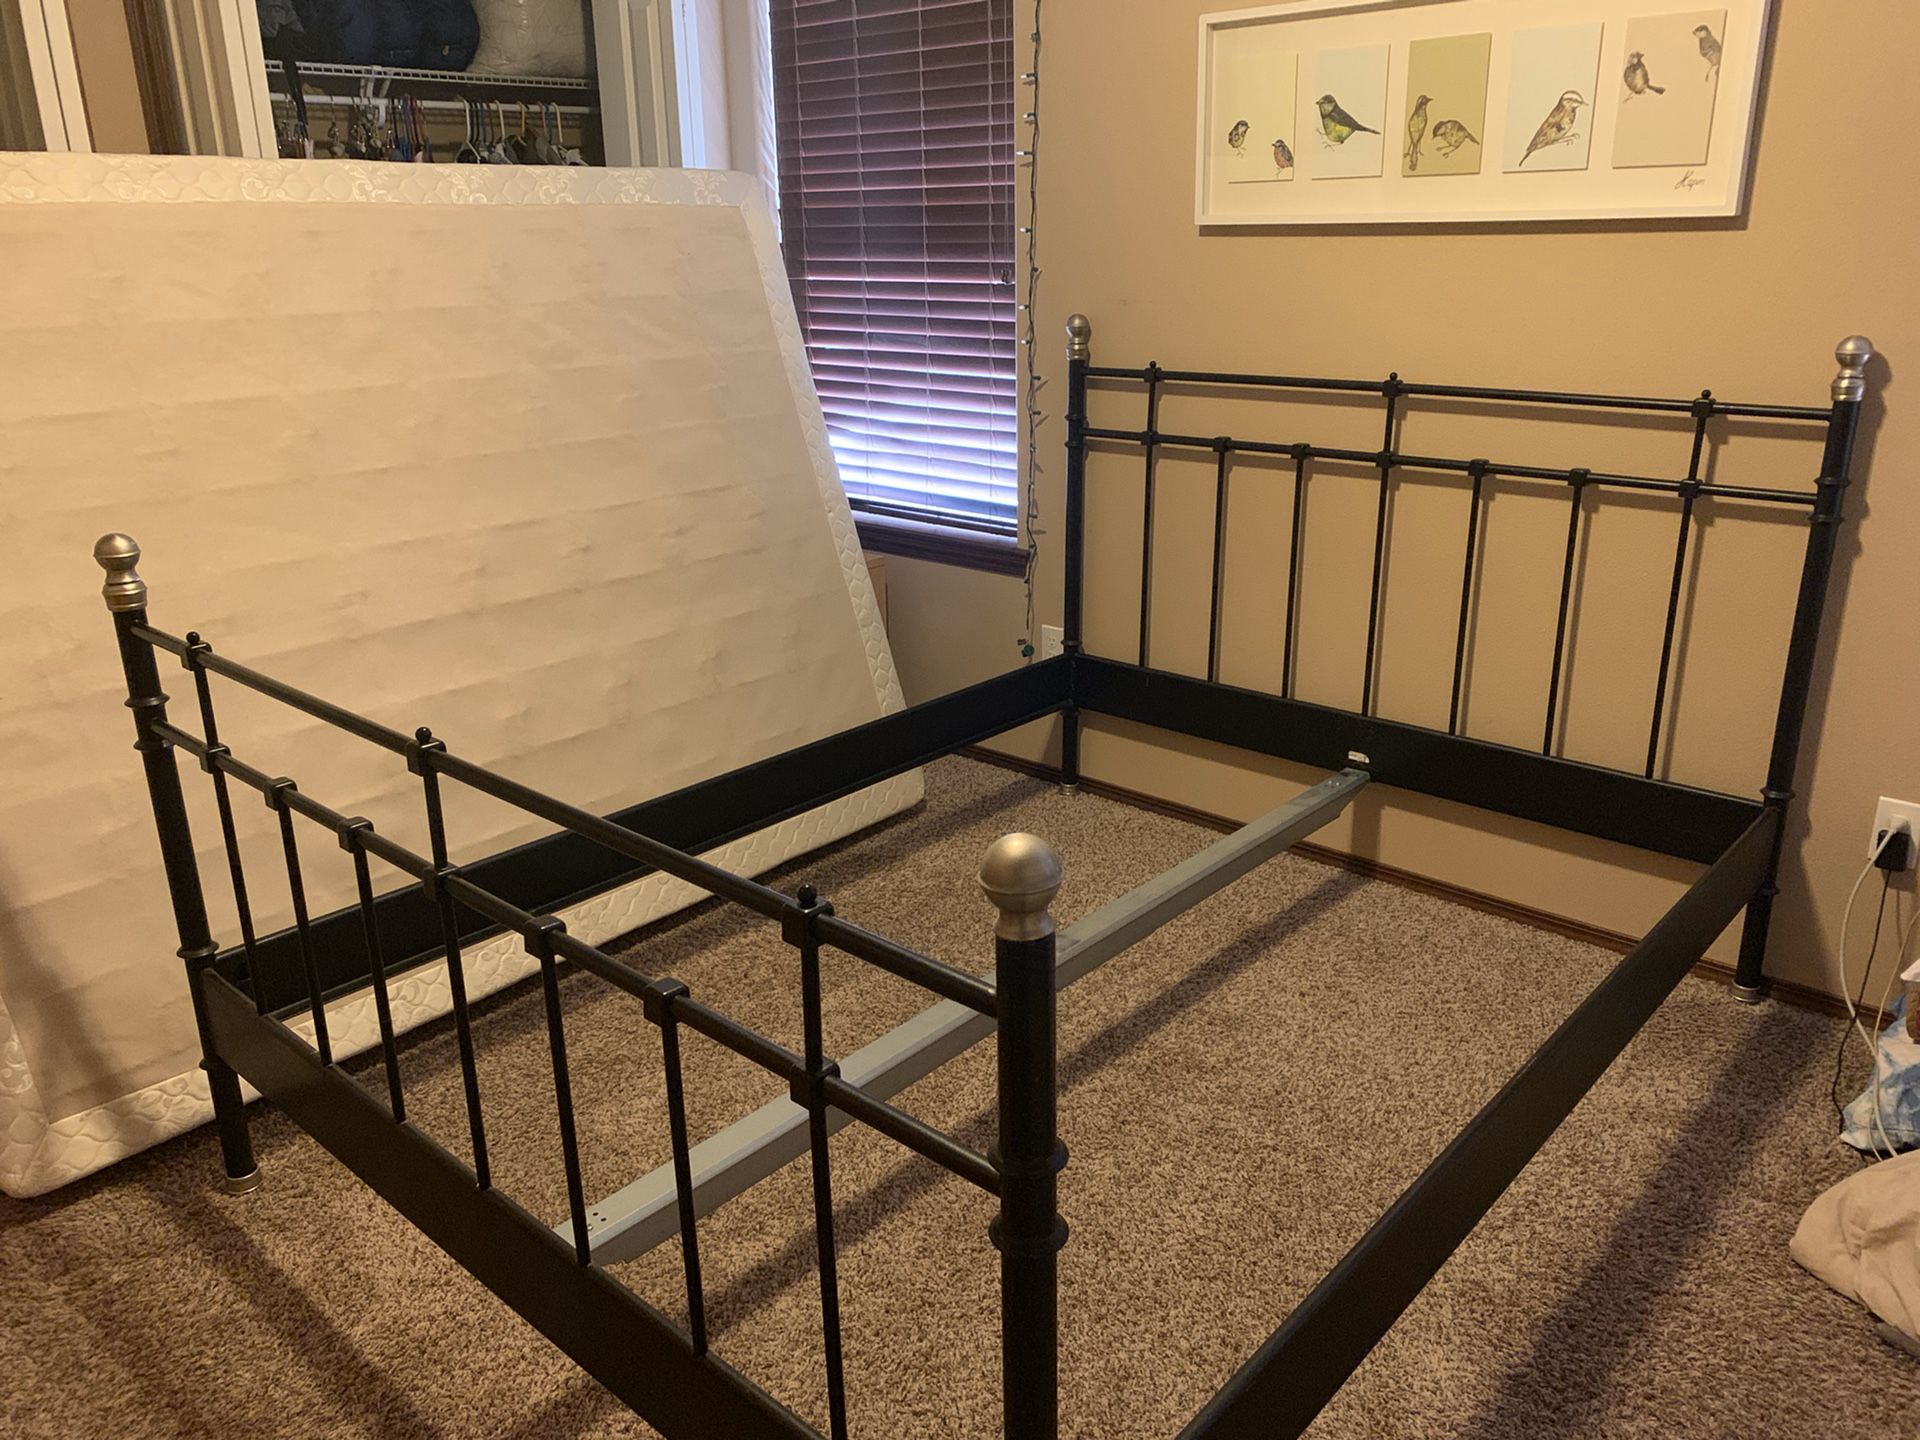 Queen sized metal bed frame with headboard and footboard, great condition, includes middle support